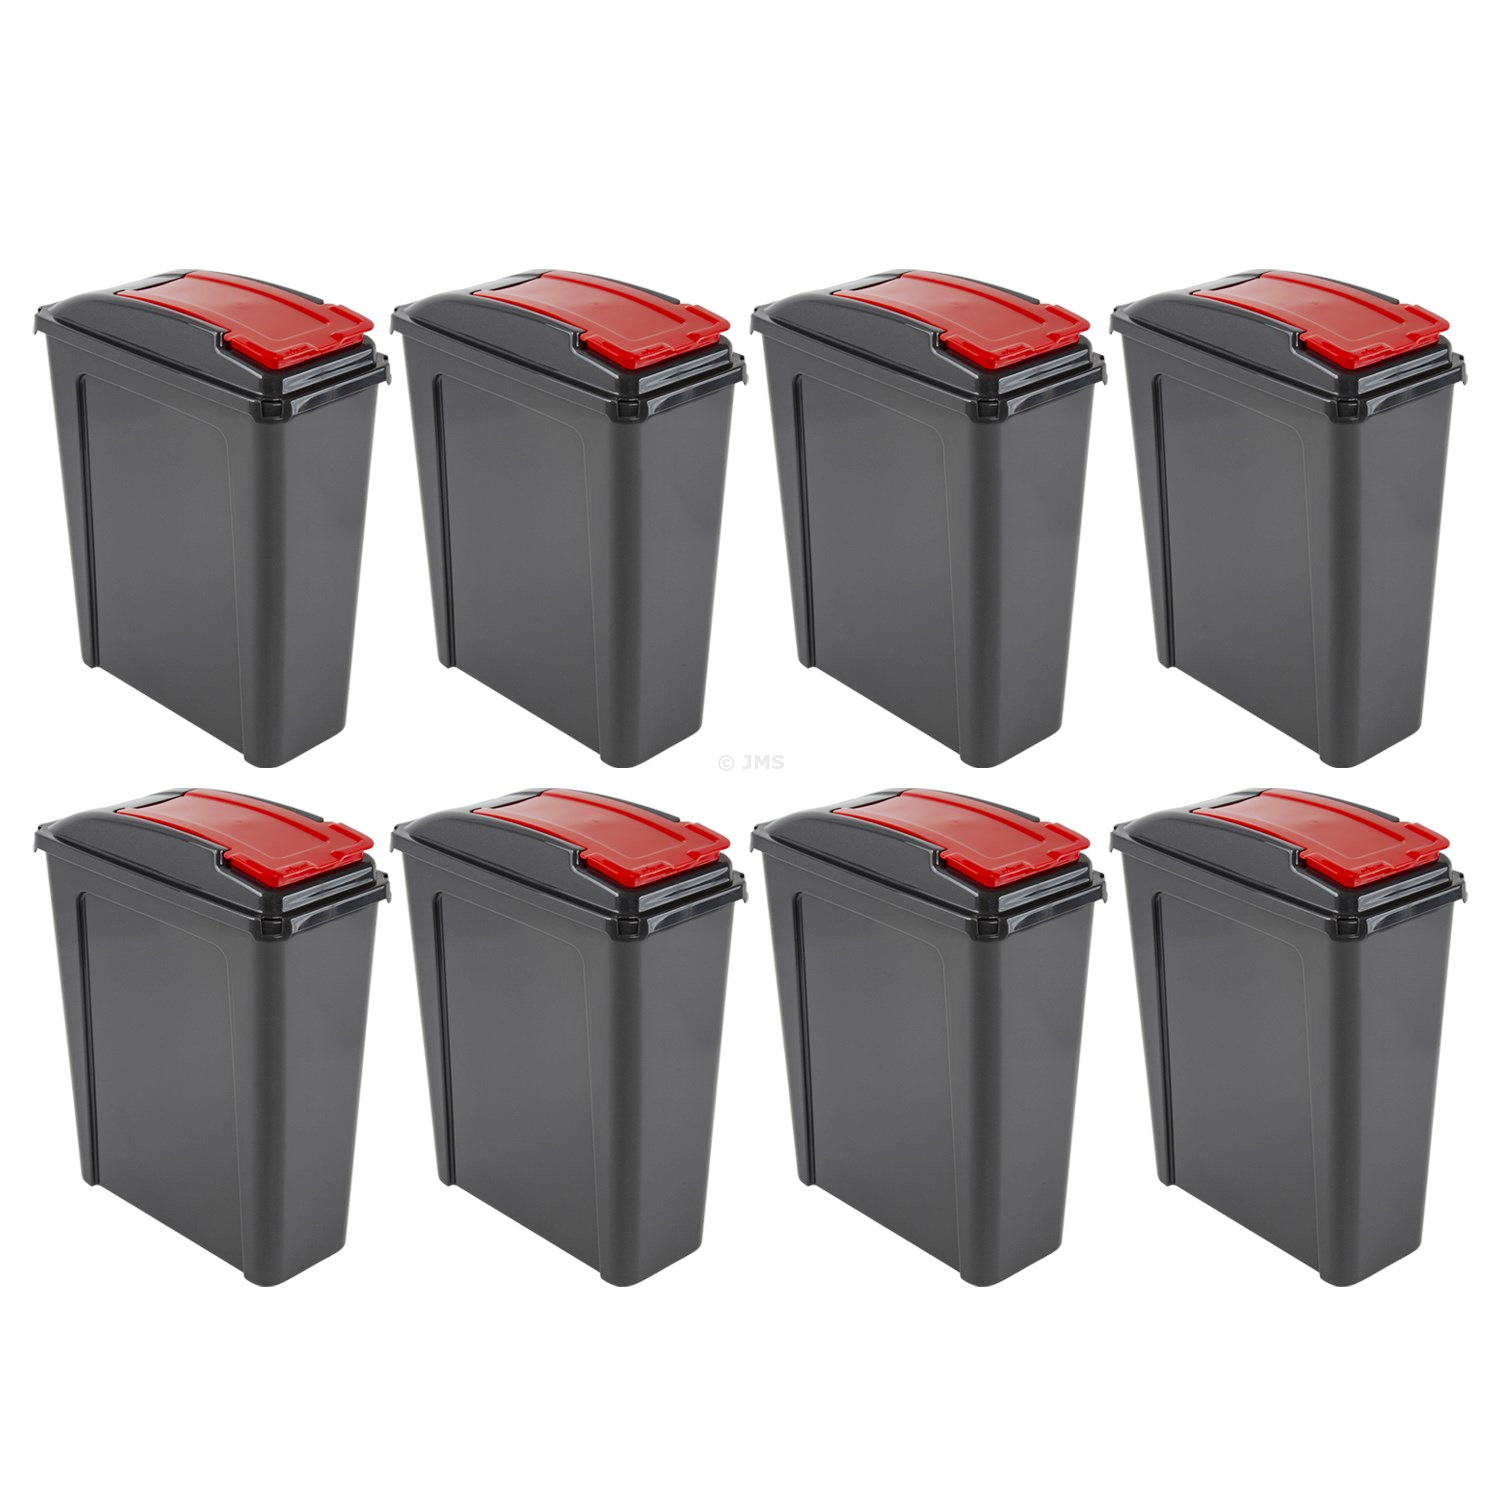 [Set of 8] Plastic Recycle Recycling Waste Dustbin 25L Slimline Bin with Red Flap Lid Multi-purpose Storage Container Home Kitchen Garden